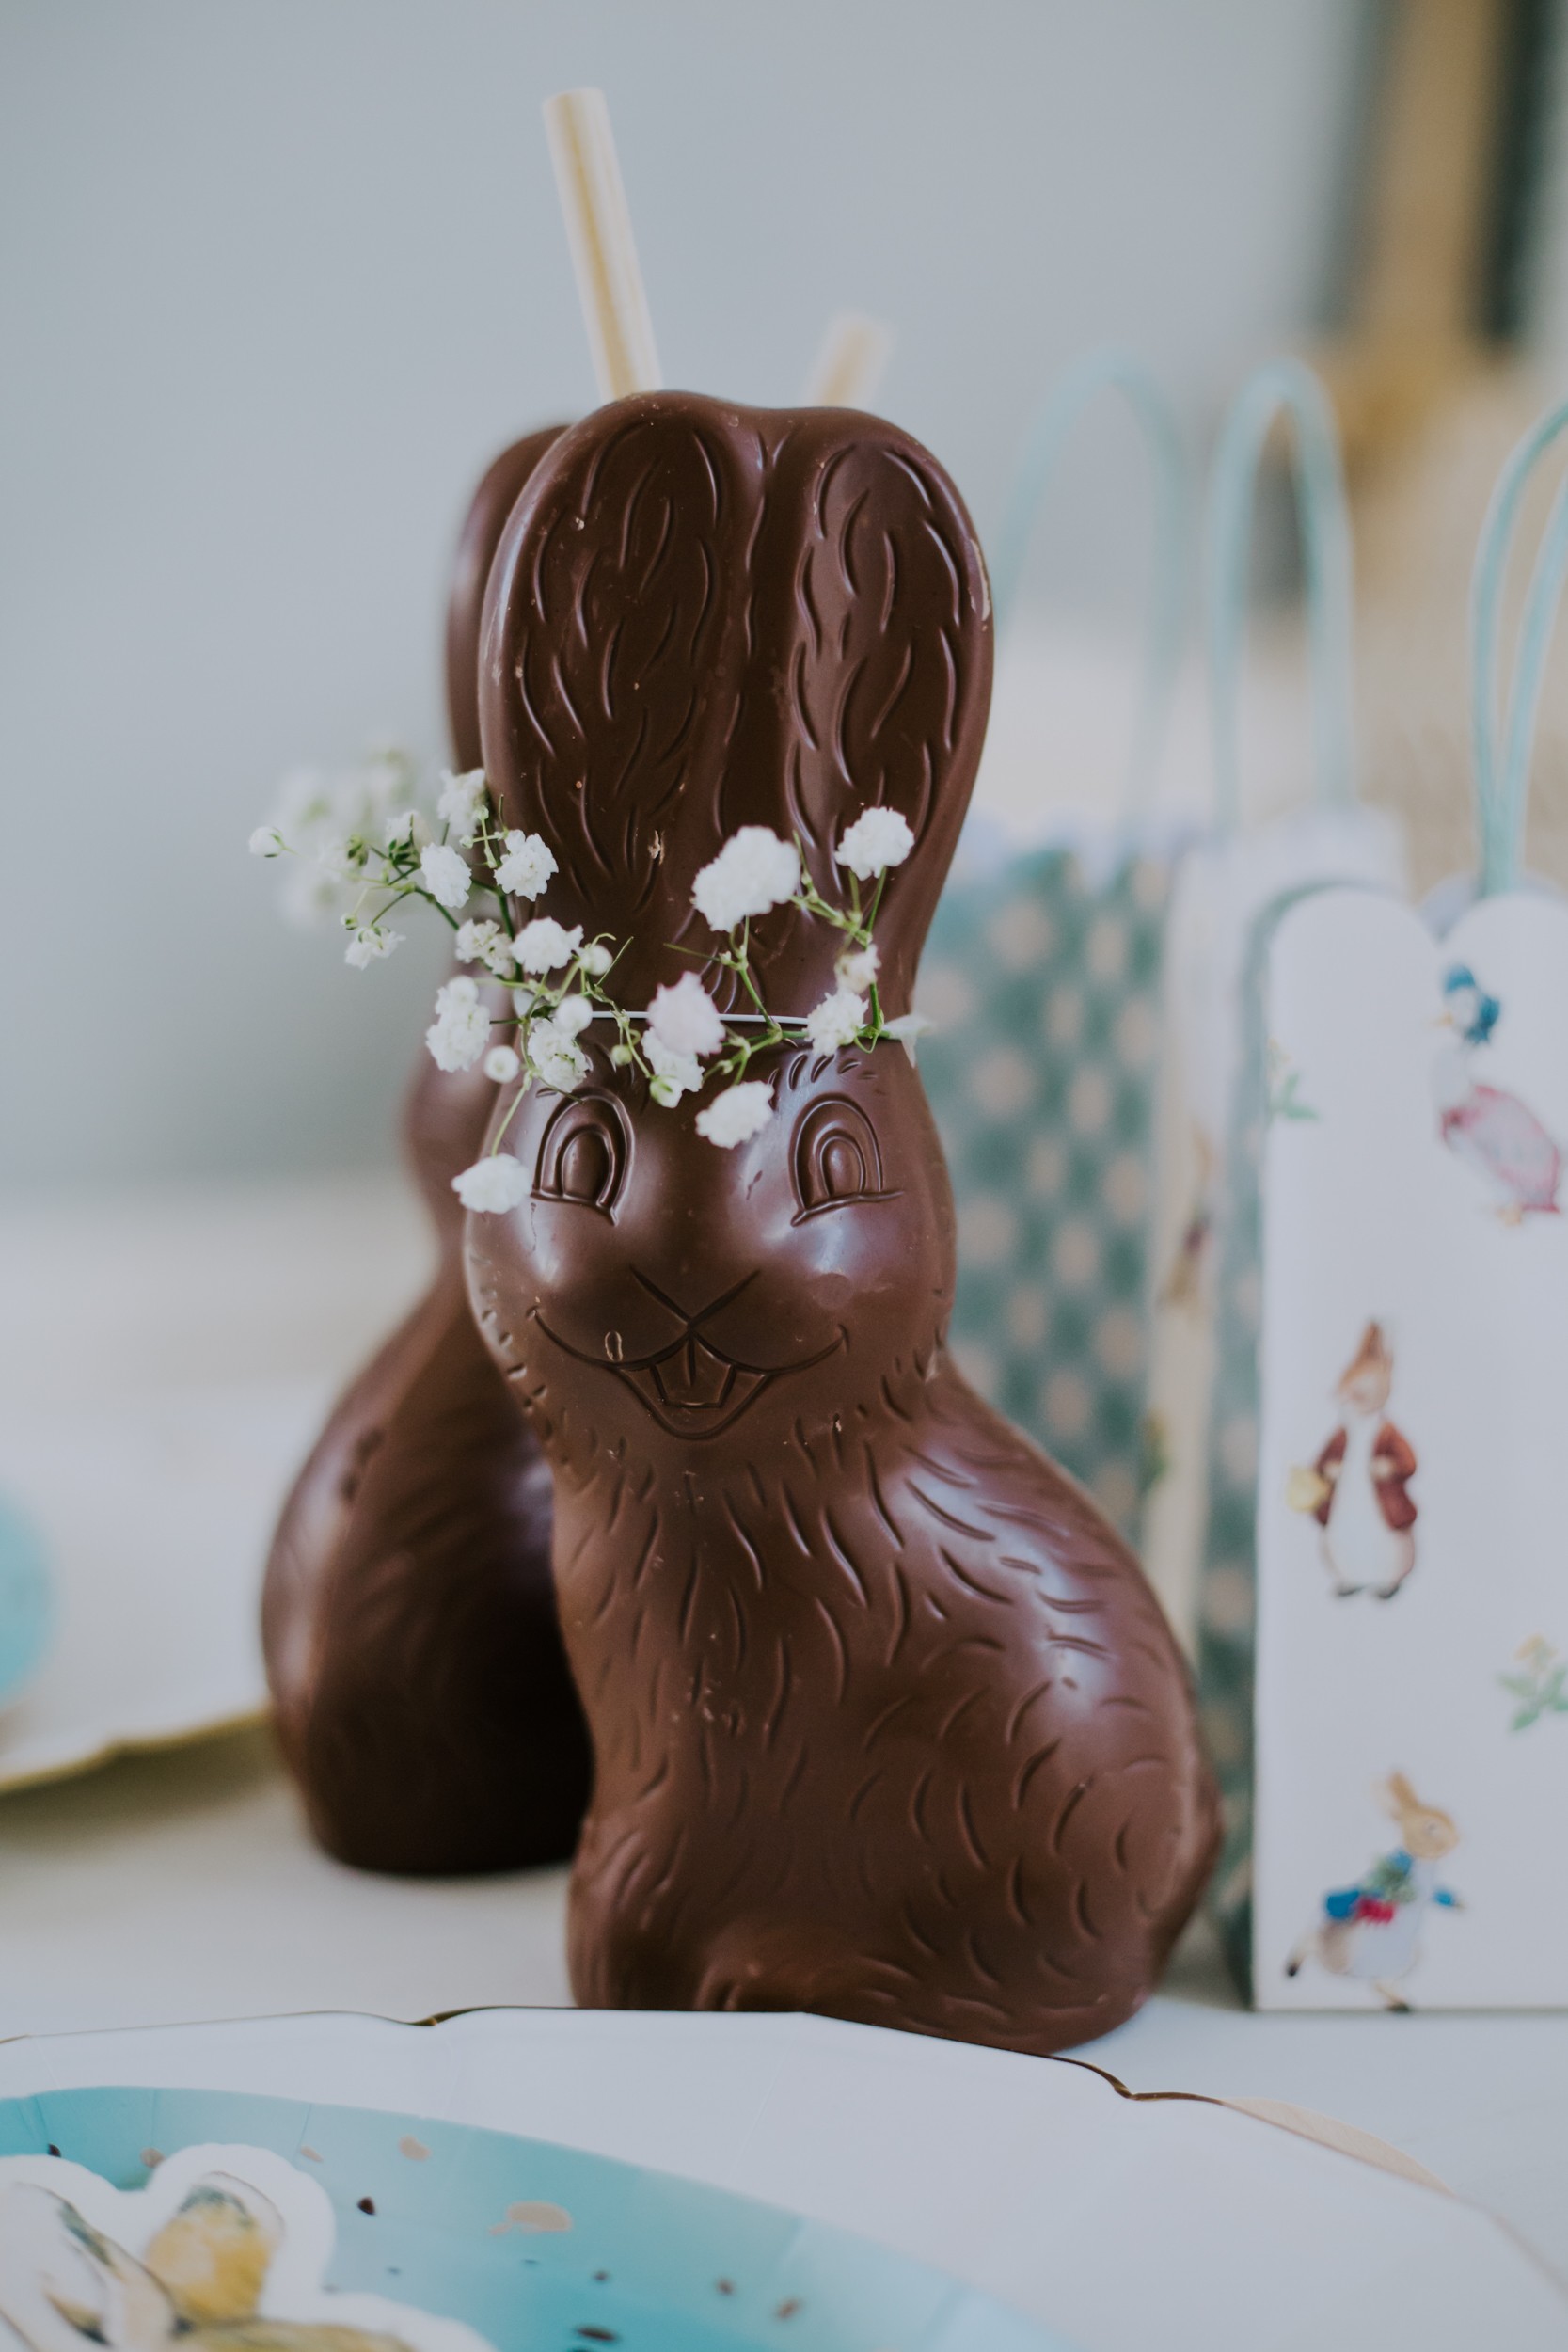 a chocolate easter bunny transformed into a glass